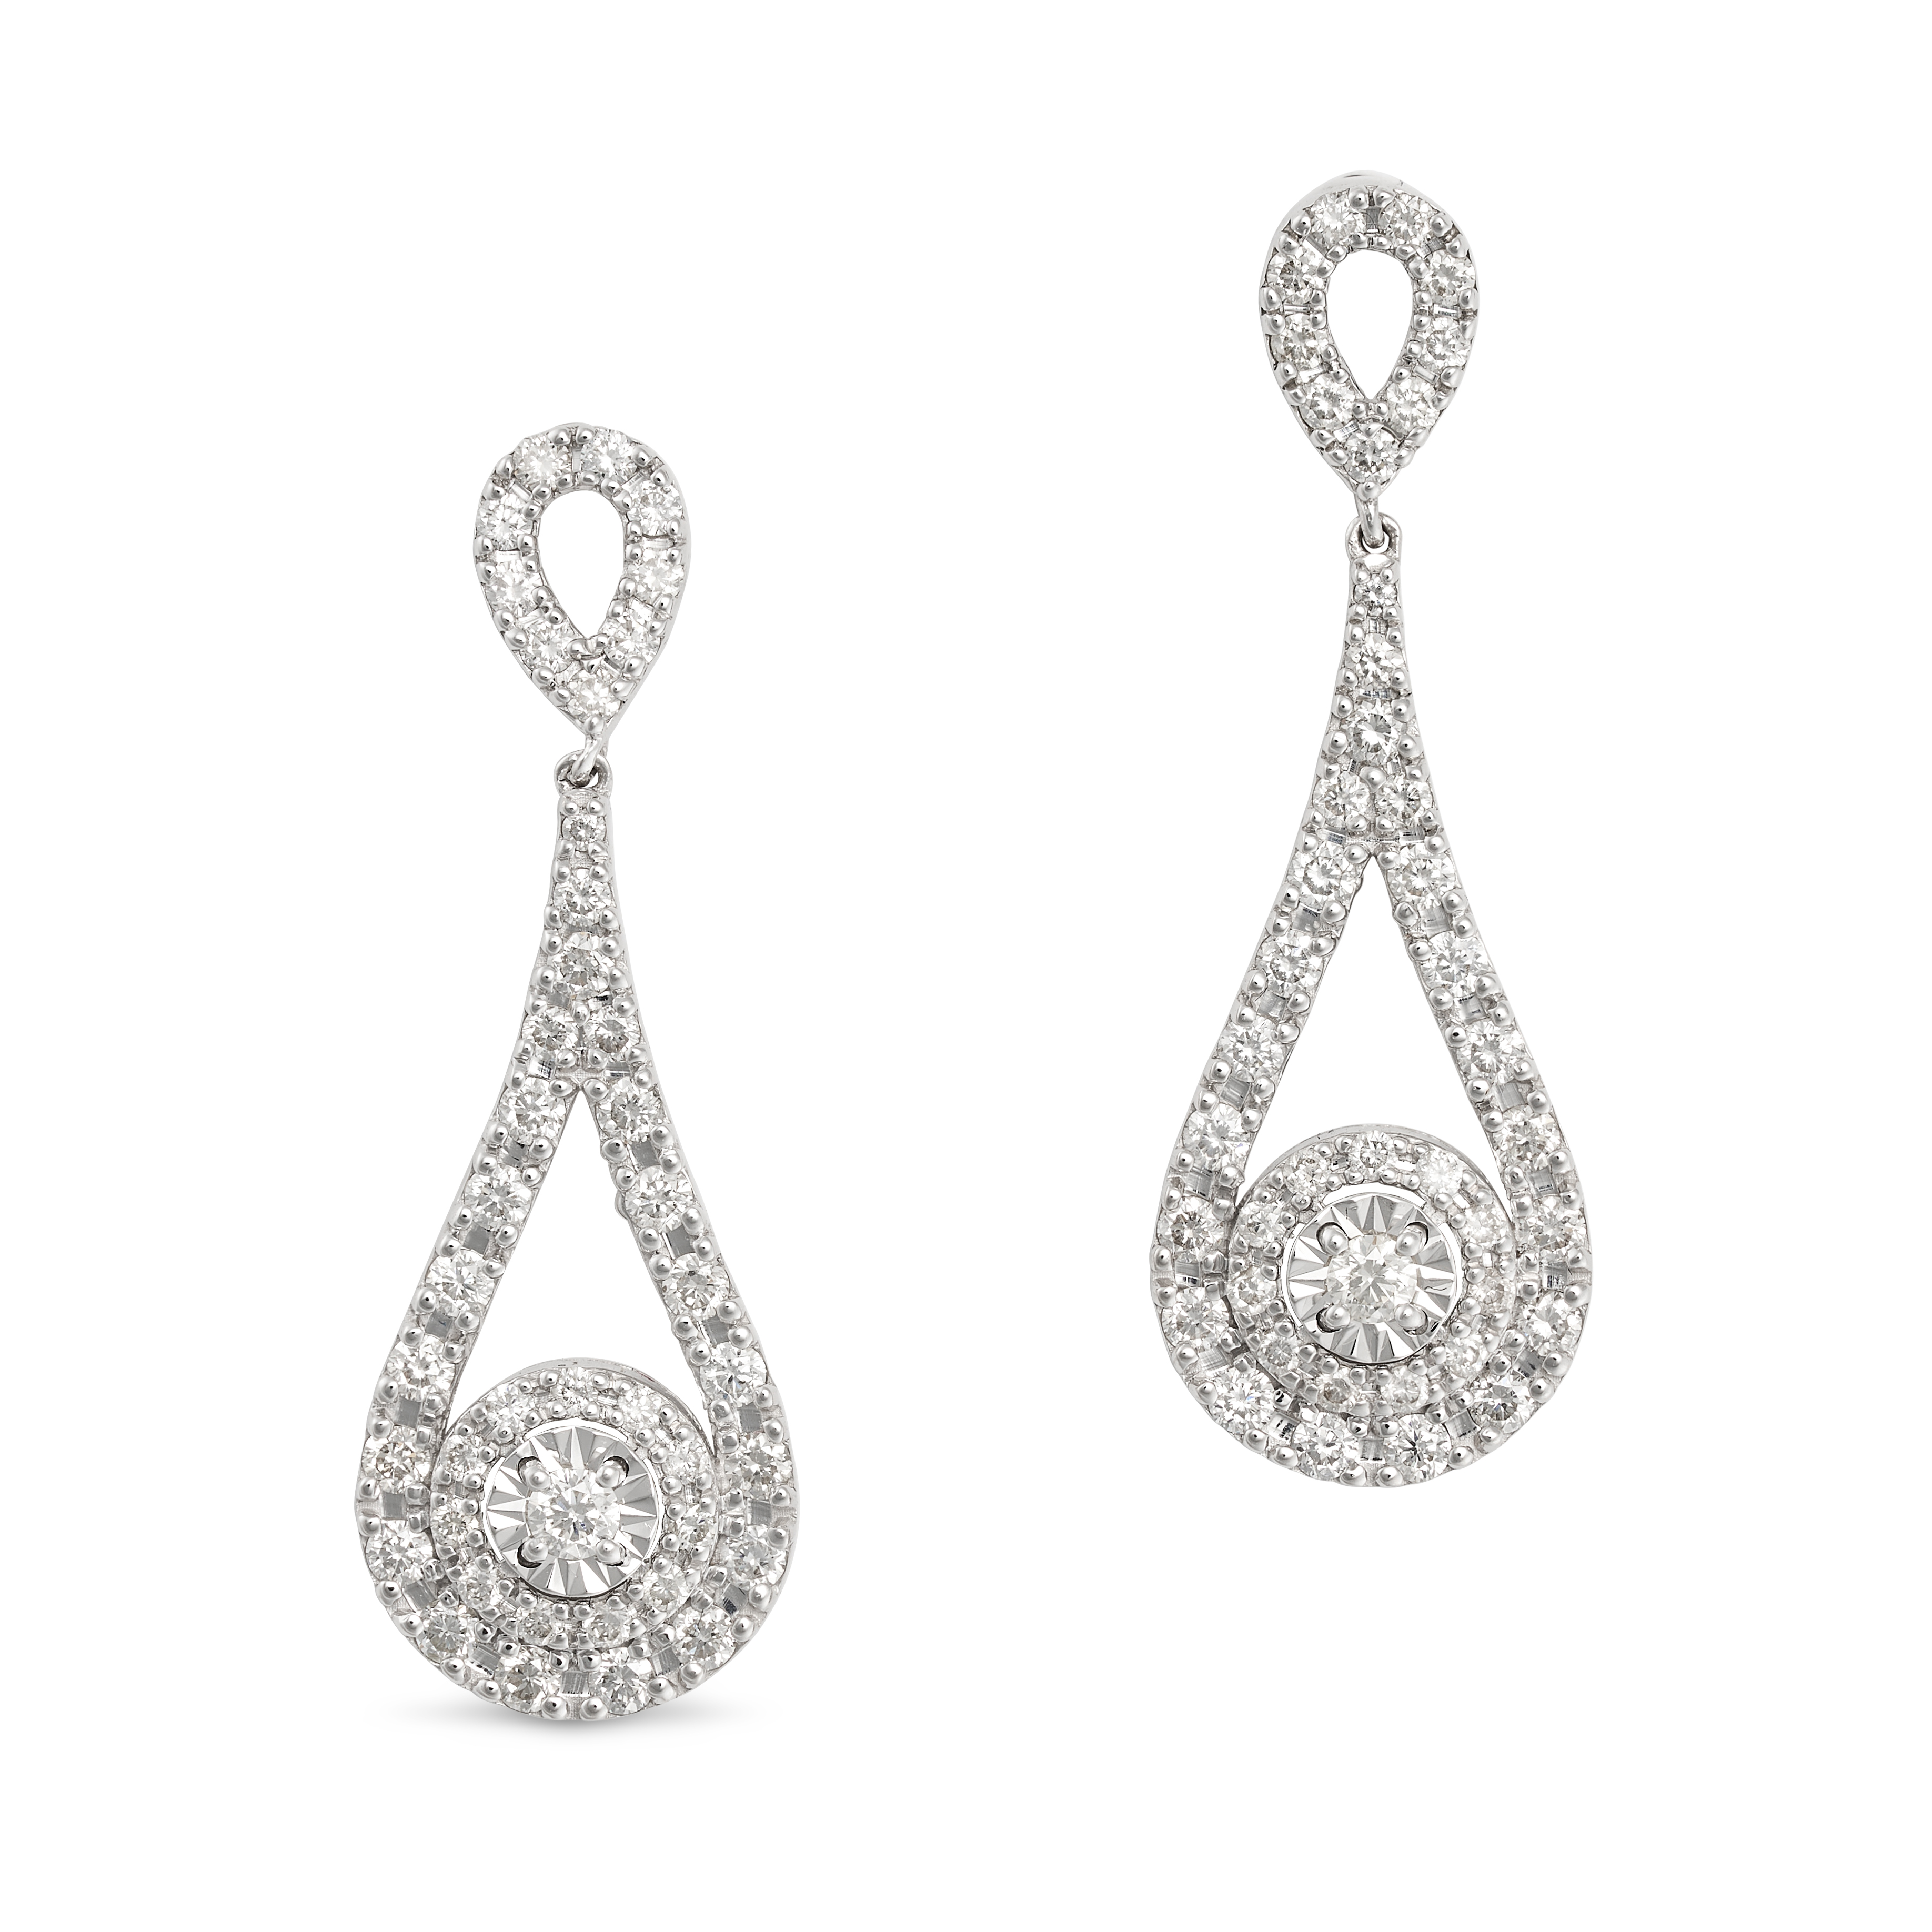 A PAIR OF DIAMOND DROP EARRINGS in 18ct white gold, each comprising a pear-shaped motif set with ...